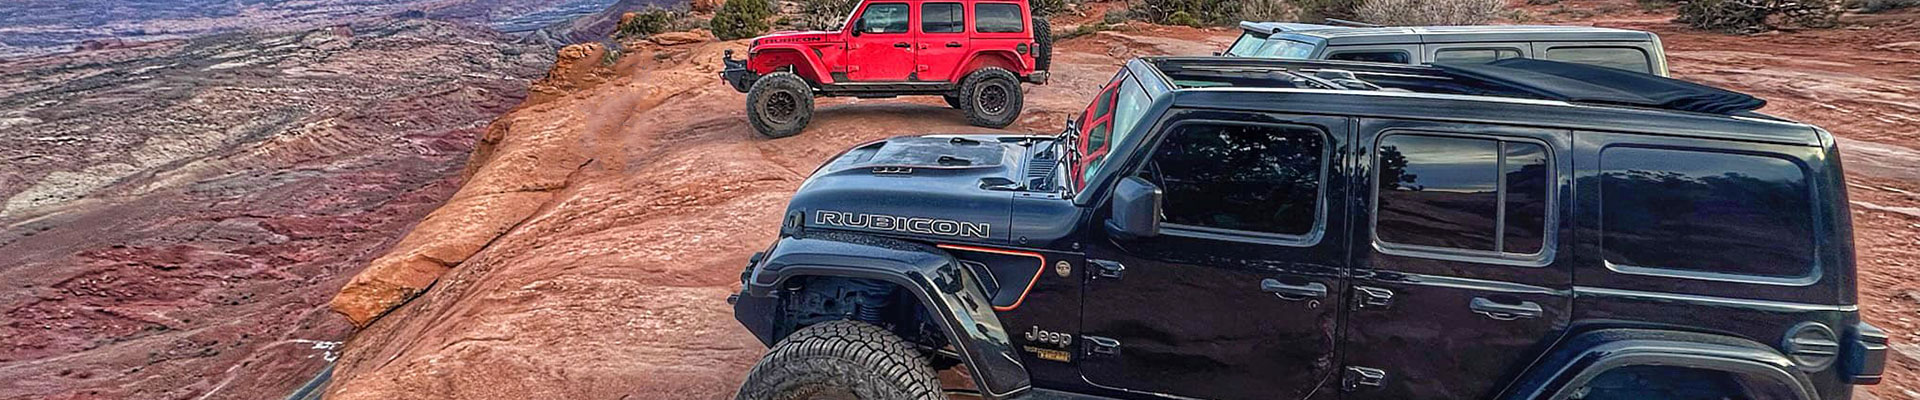 Fantasy RV Tours: 8 Day Moab Off-Roadin’ for Jeep Wrangler Owners (08UMOP-043025)